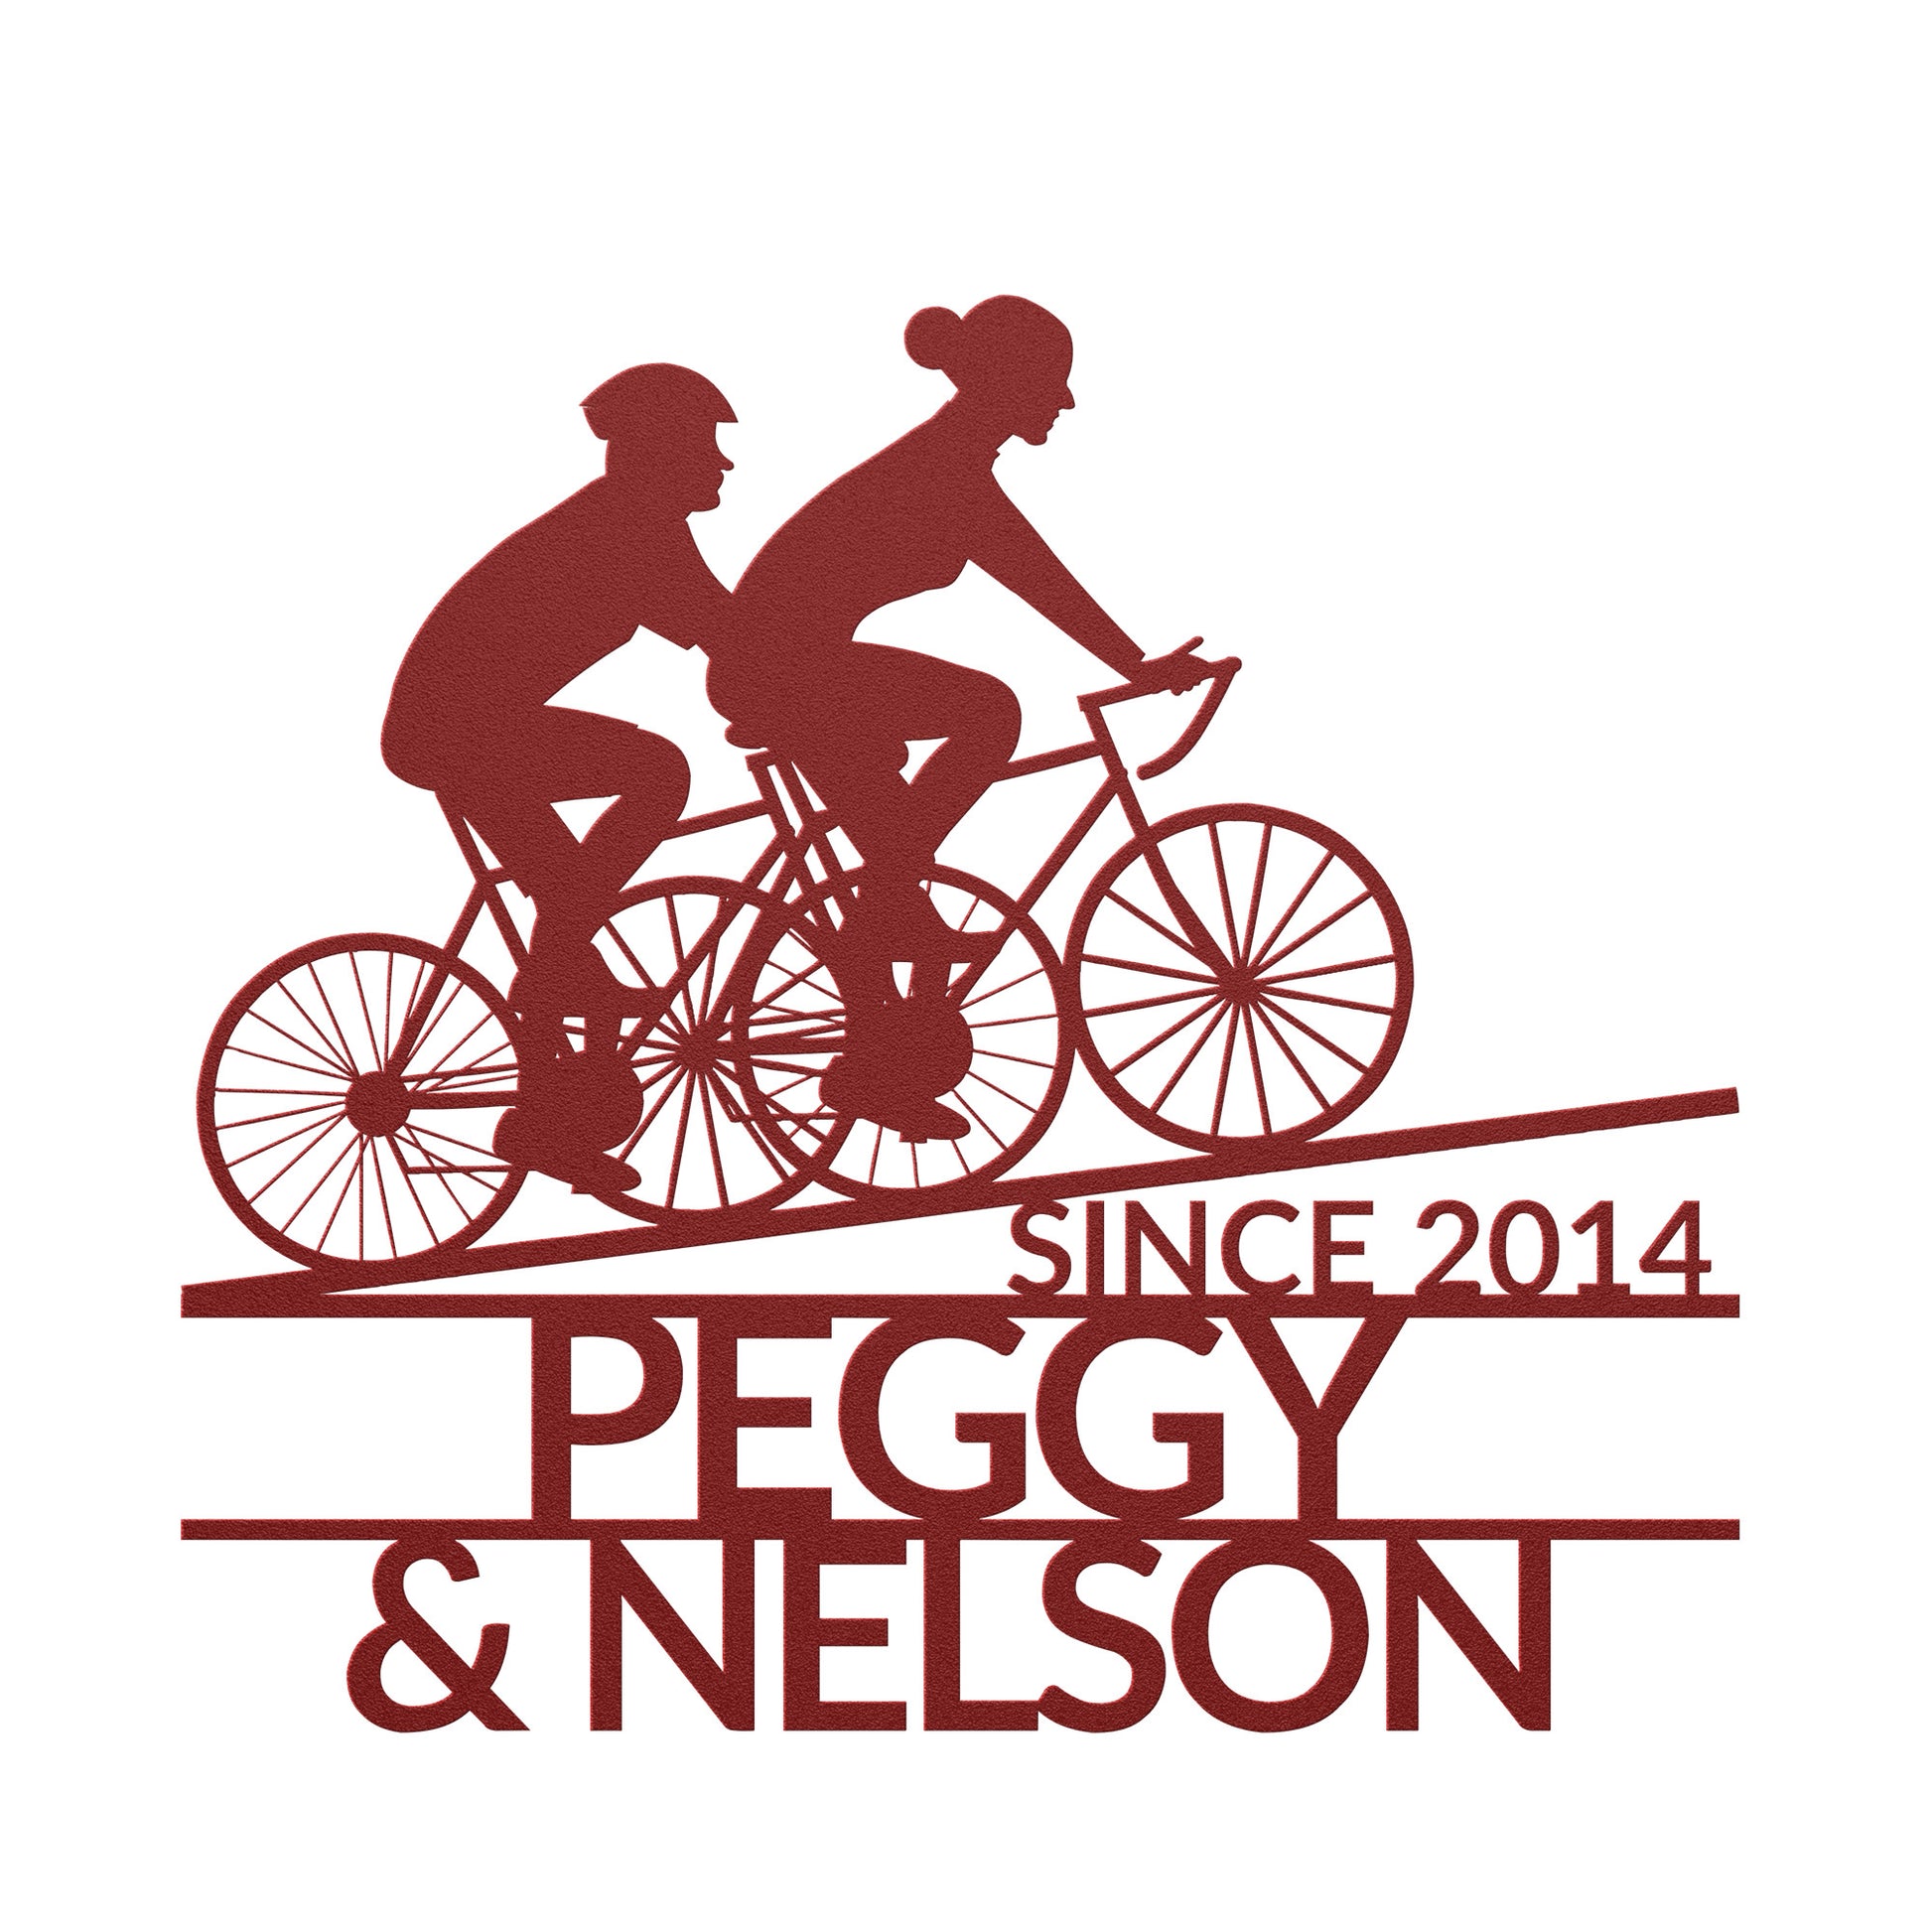 teelaunch's Personalized Couple Cycling Uphill Metal Wall Art Sign with engraved names and year established.